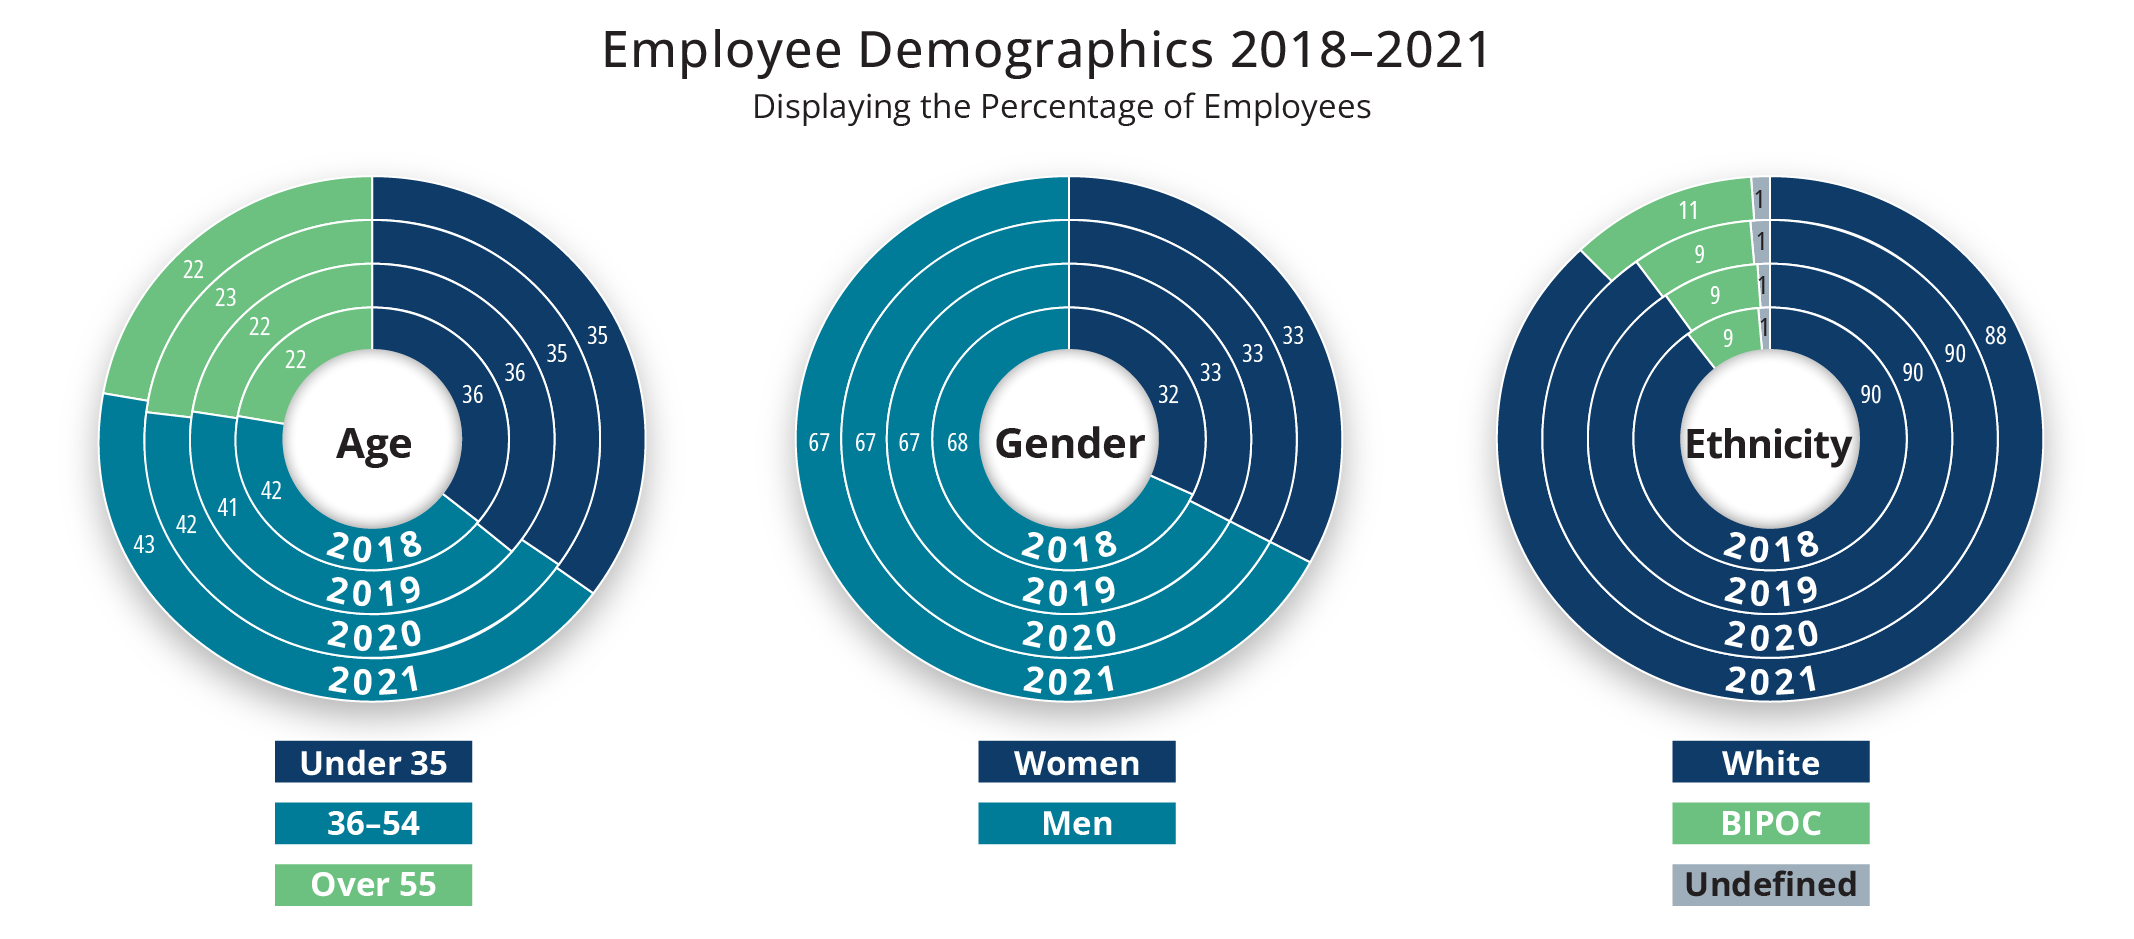 Charts of employee demographics by age, gender, and ethnicity